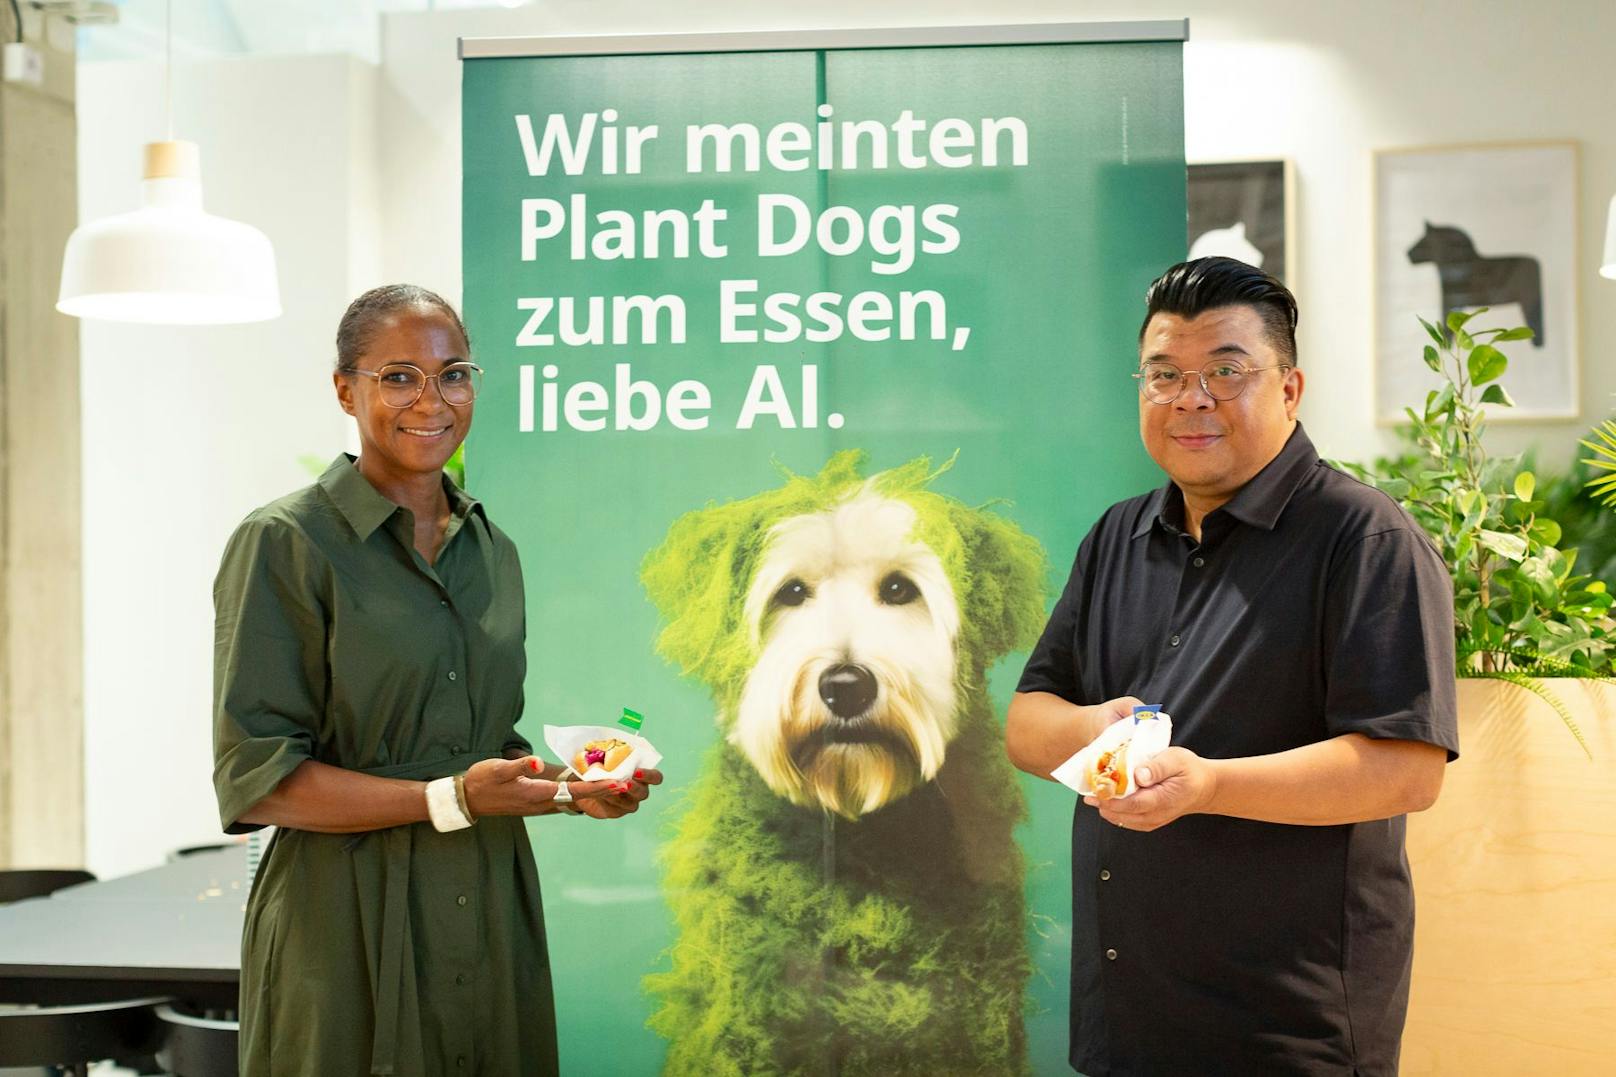 Sichtlich stolz: Maimuna Mosser, Country Commercial Manager und Kit Wai Kan, Country Food Manager bei IKEA Österreich.